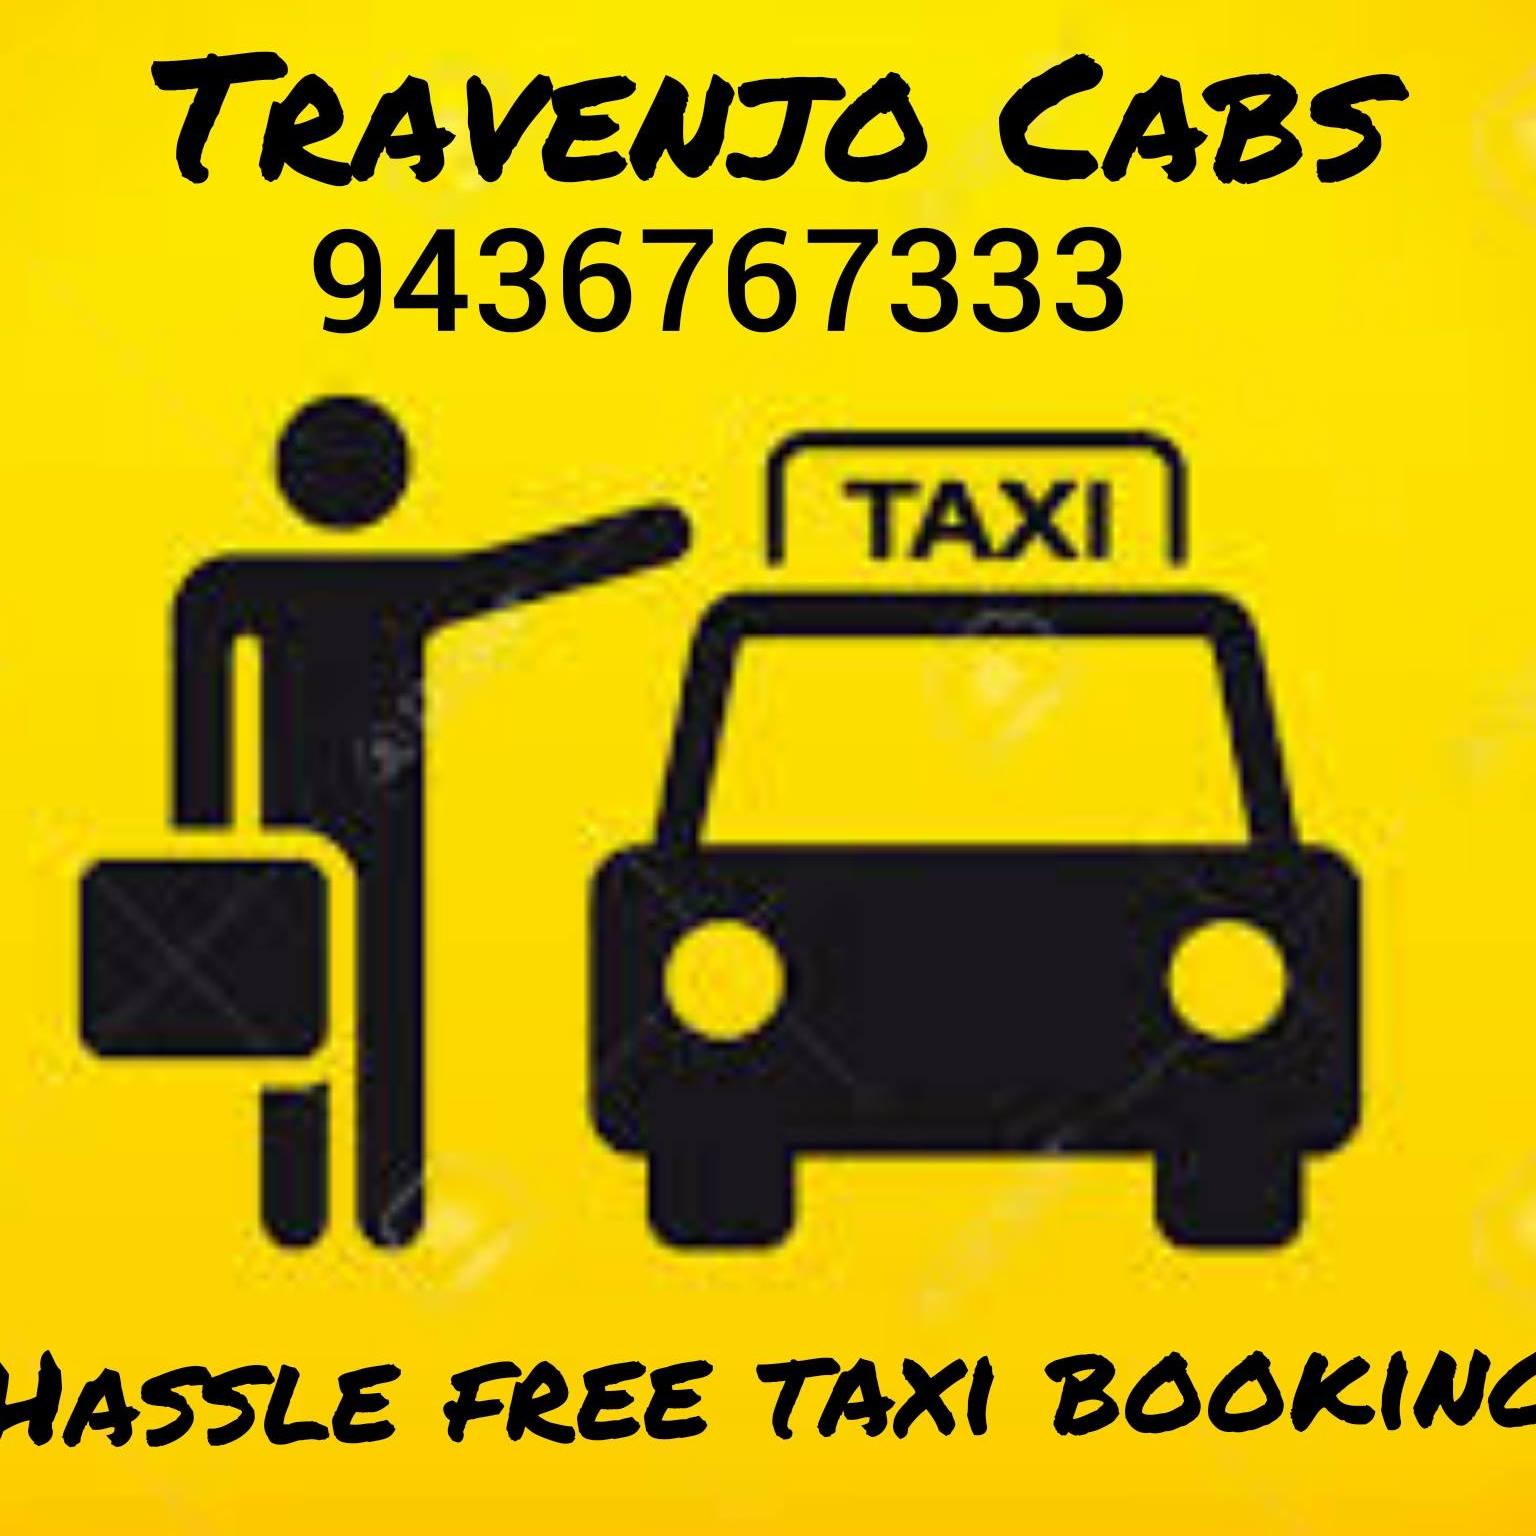 Travenjo (Tours and Cabs)